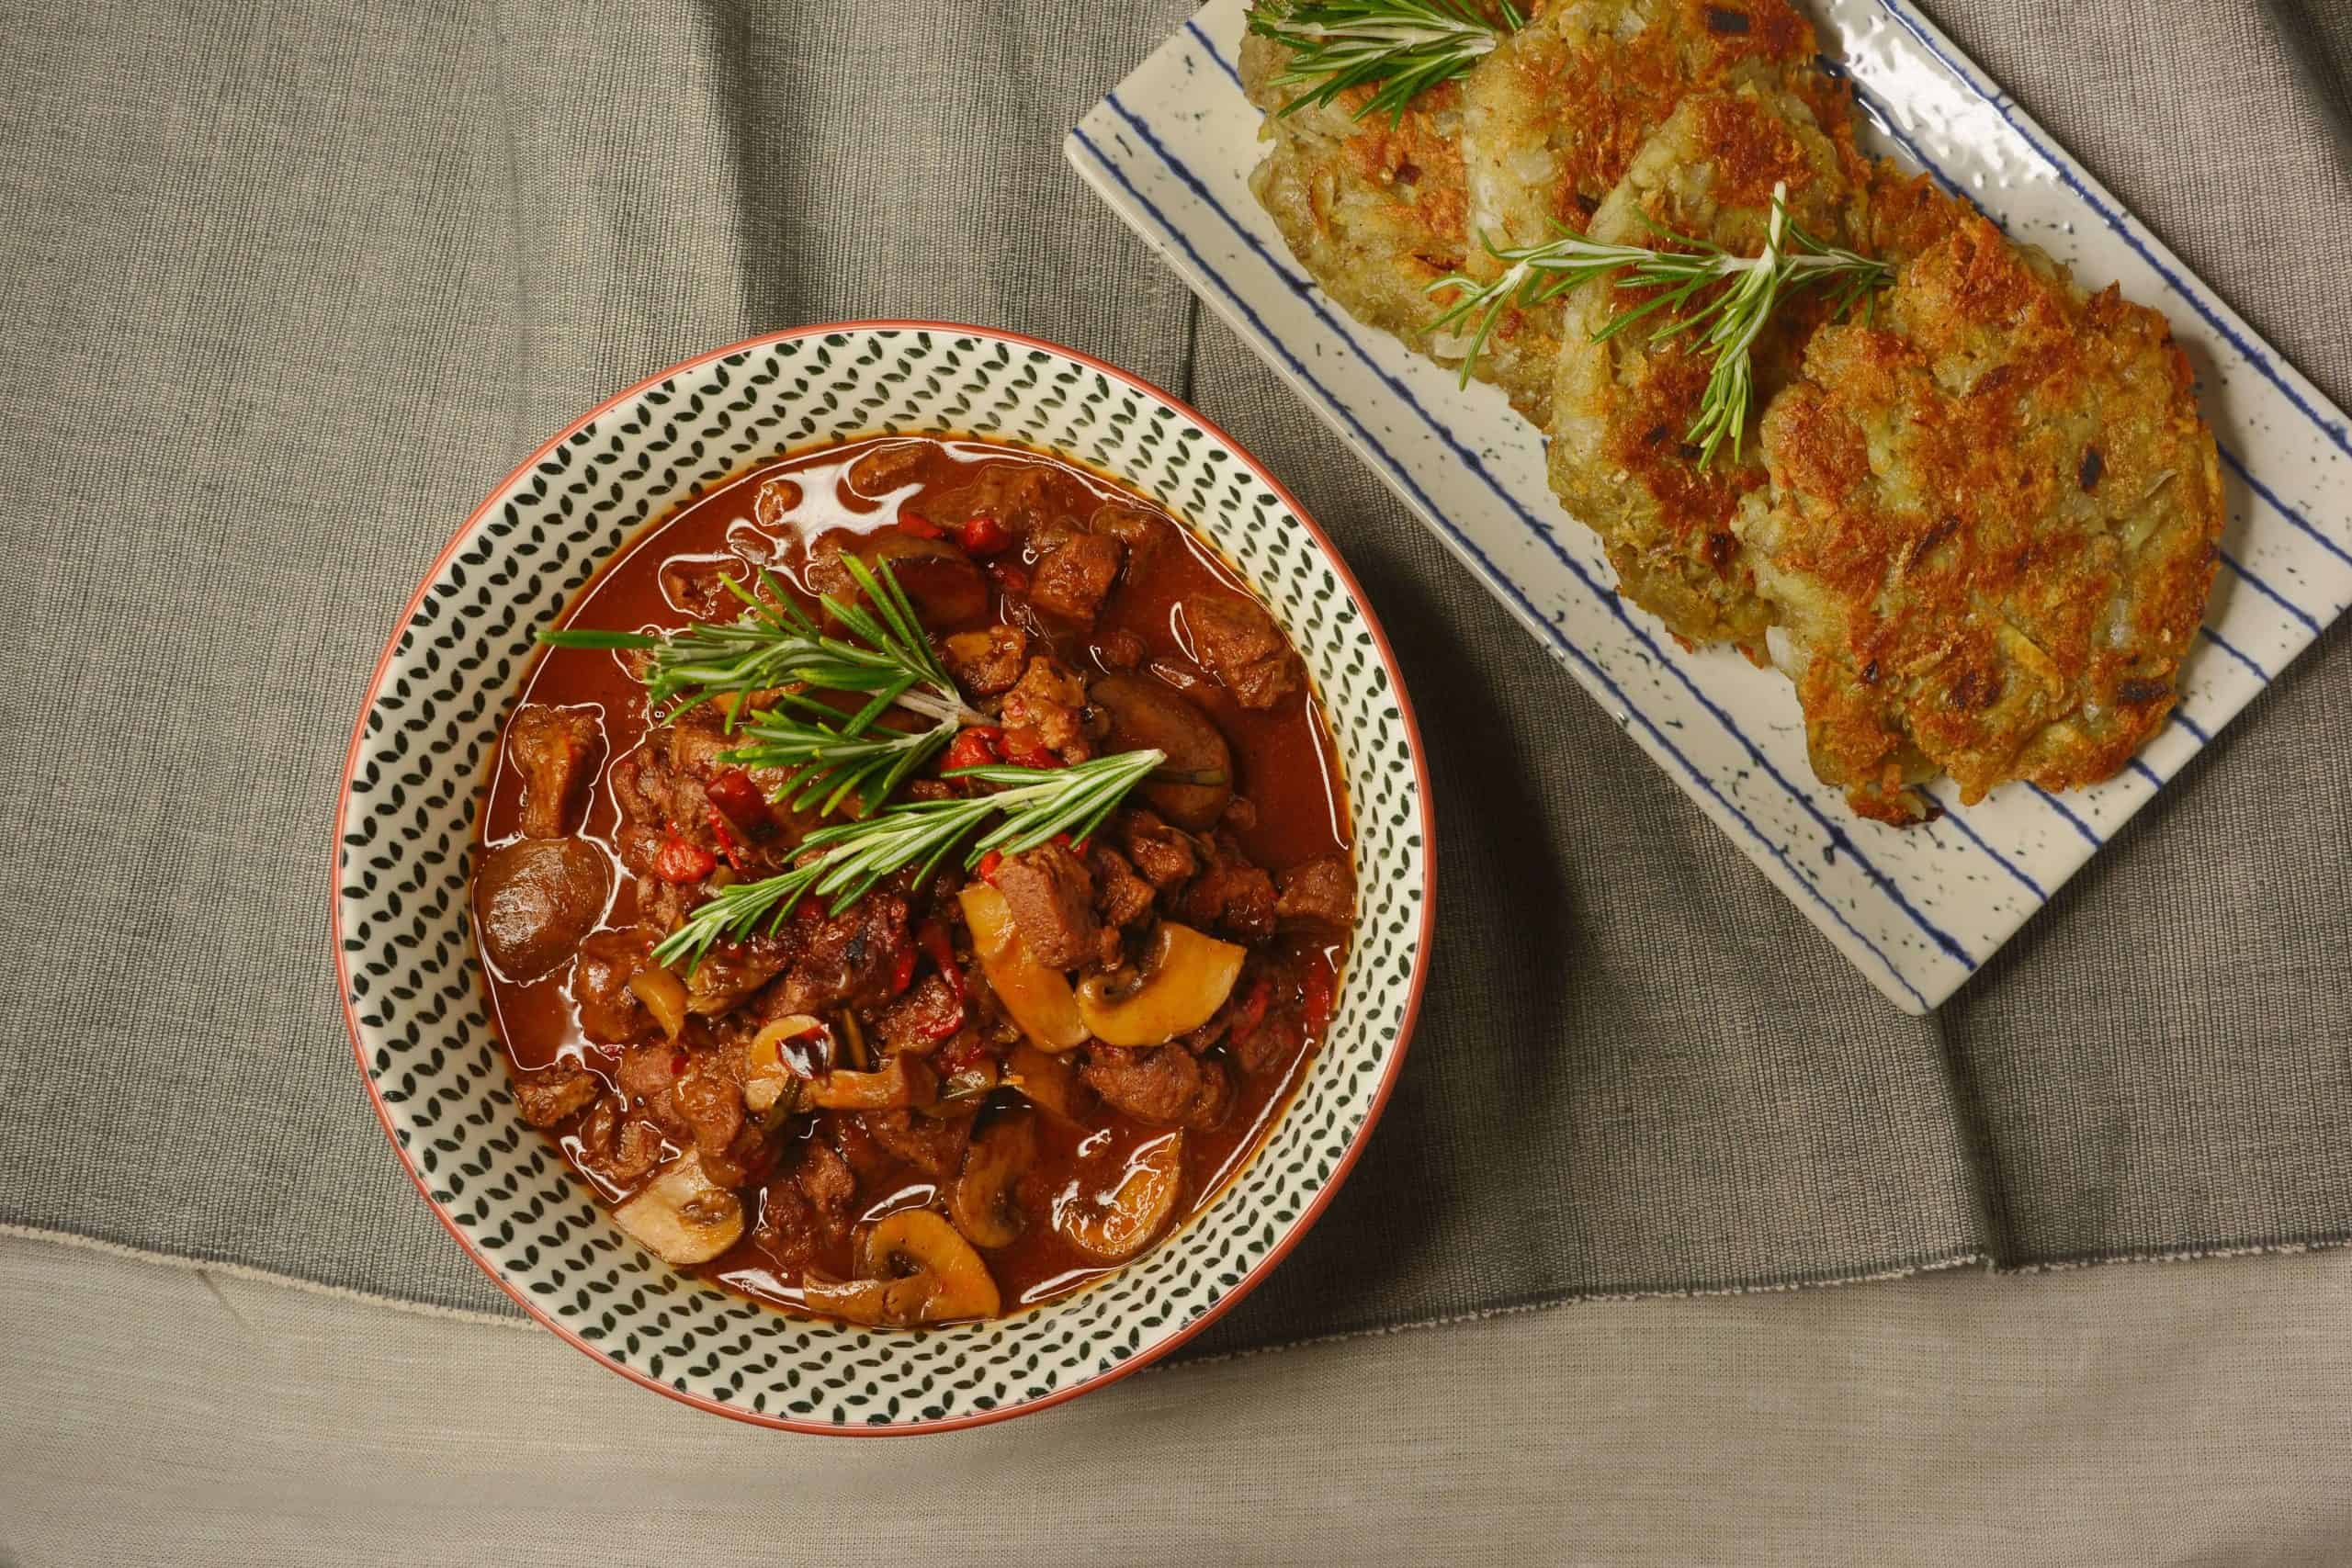 German-style goulash with soy protein chunks